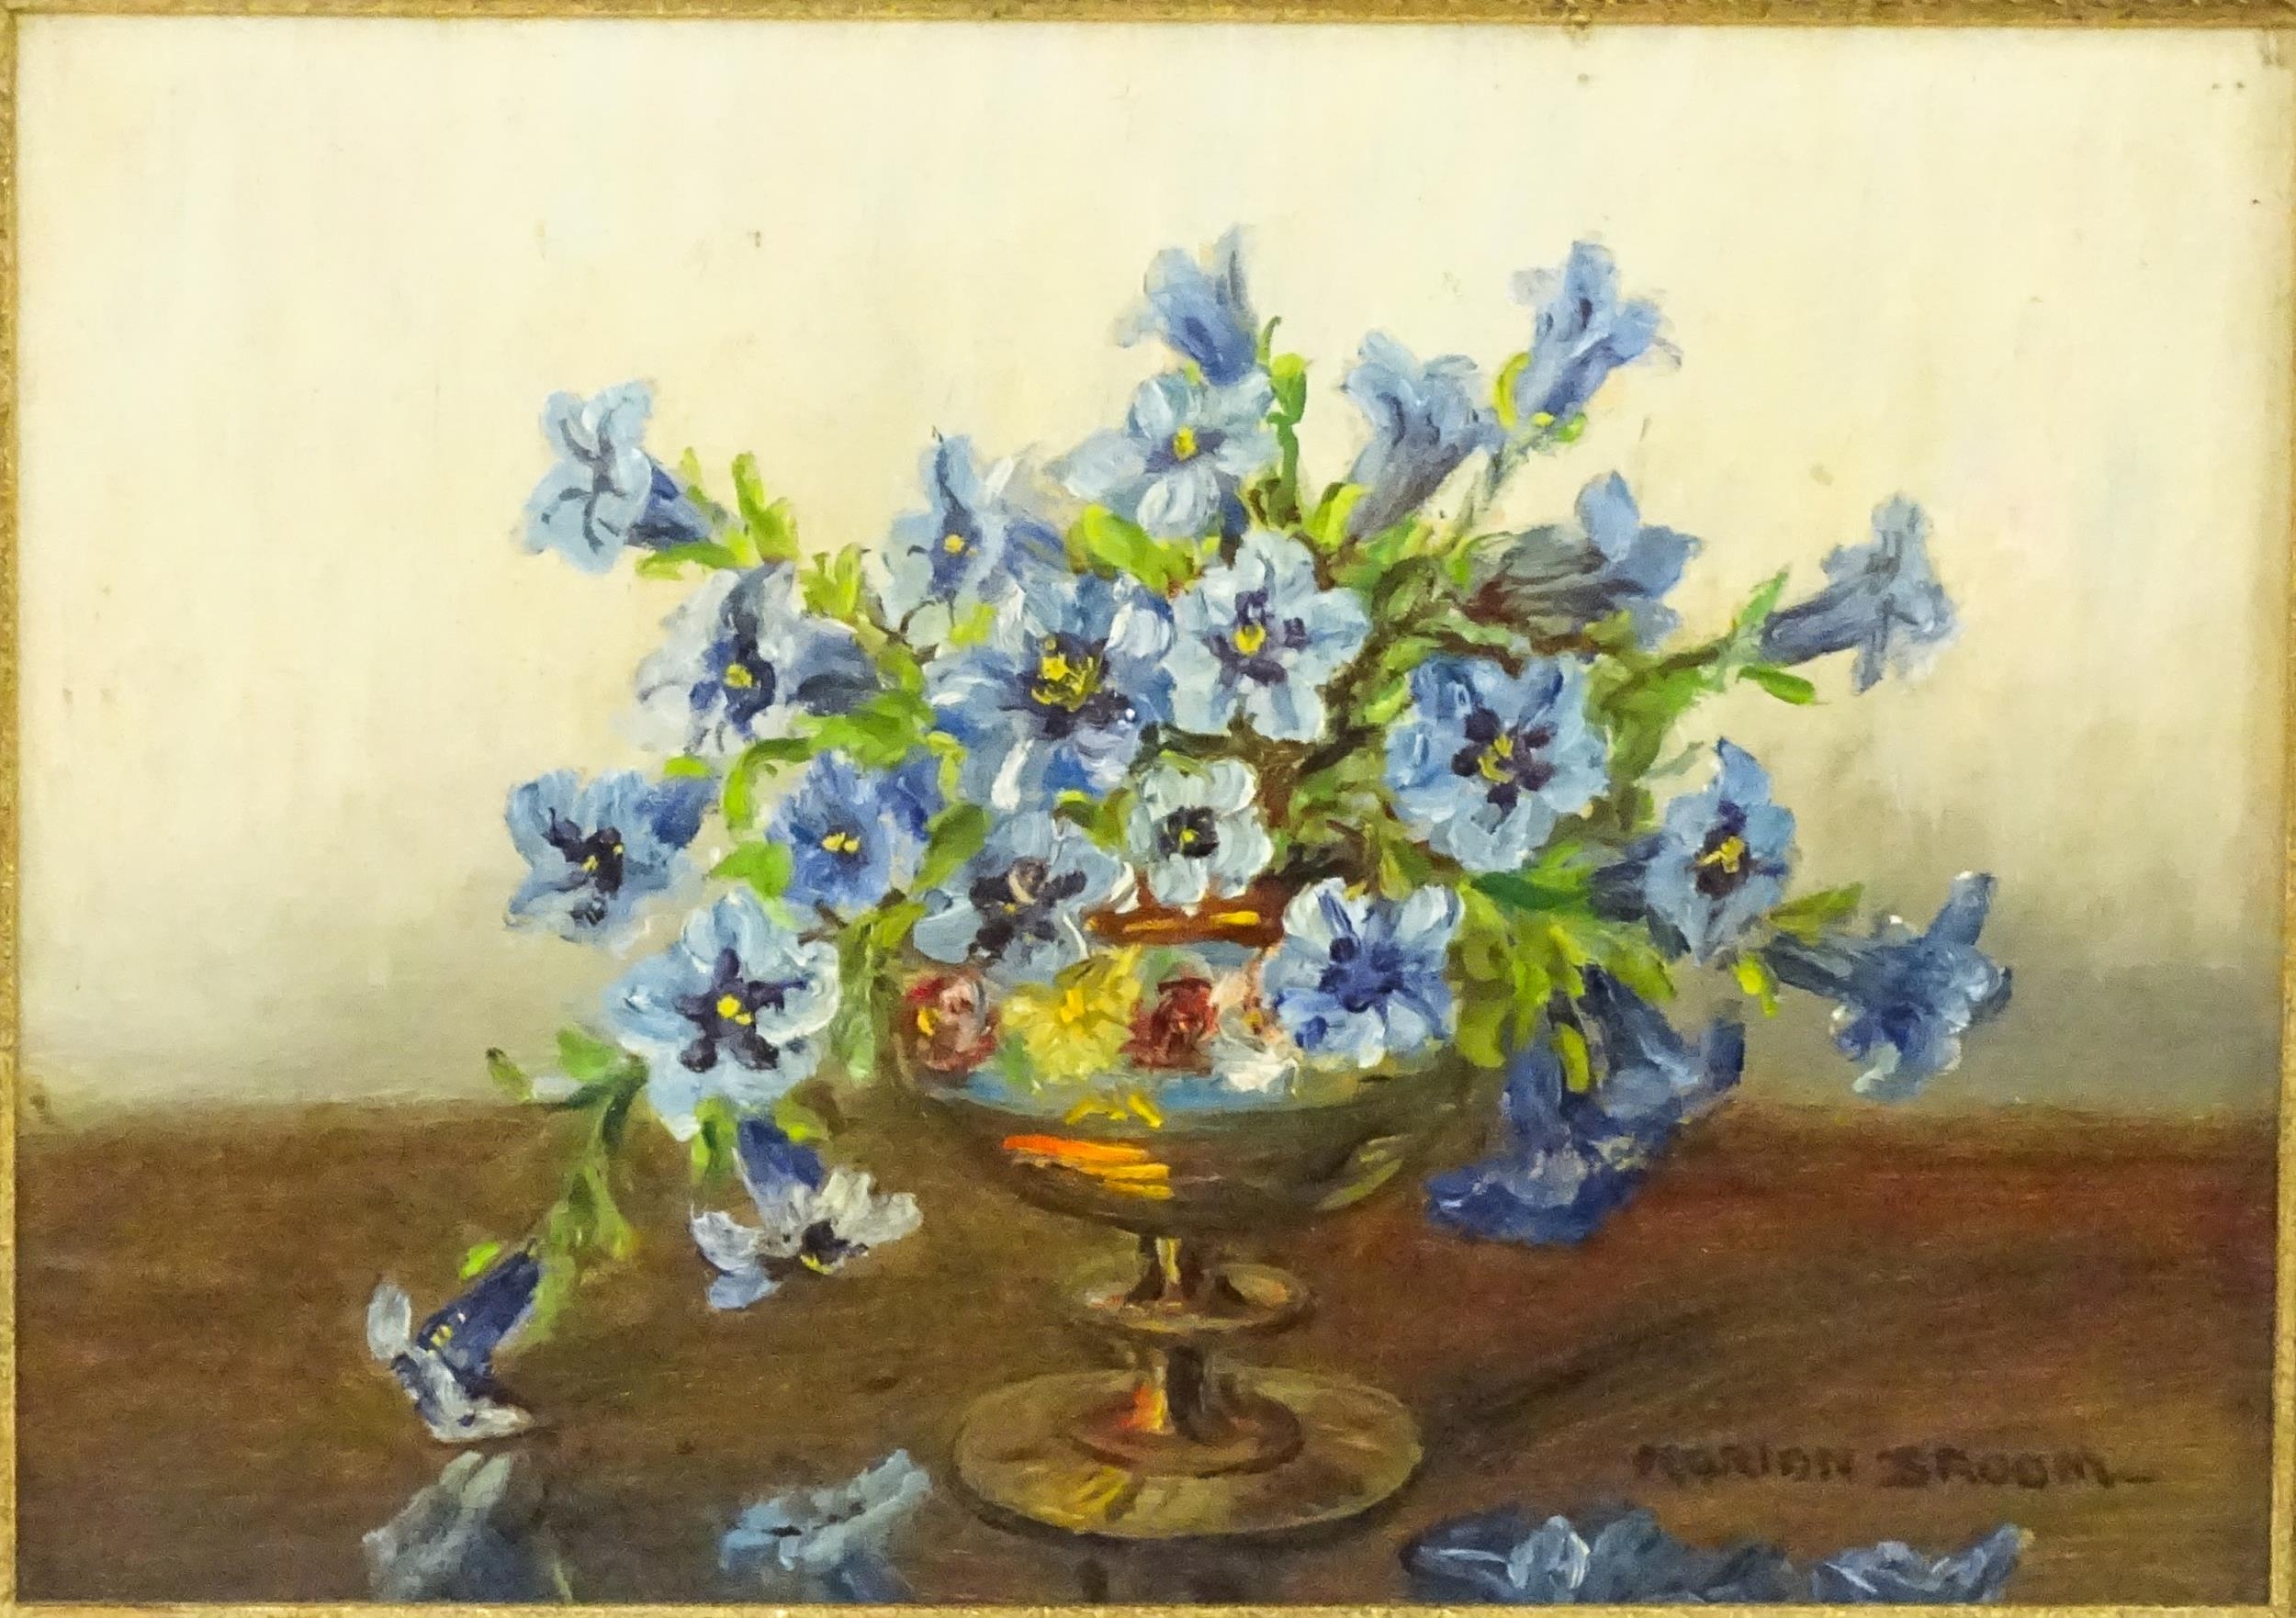 Marion Broom (1878-1962), Oil on board, A still life study of blue gentian flowers in a pedestal - Image 3 of 4